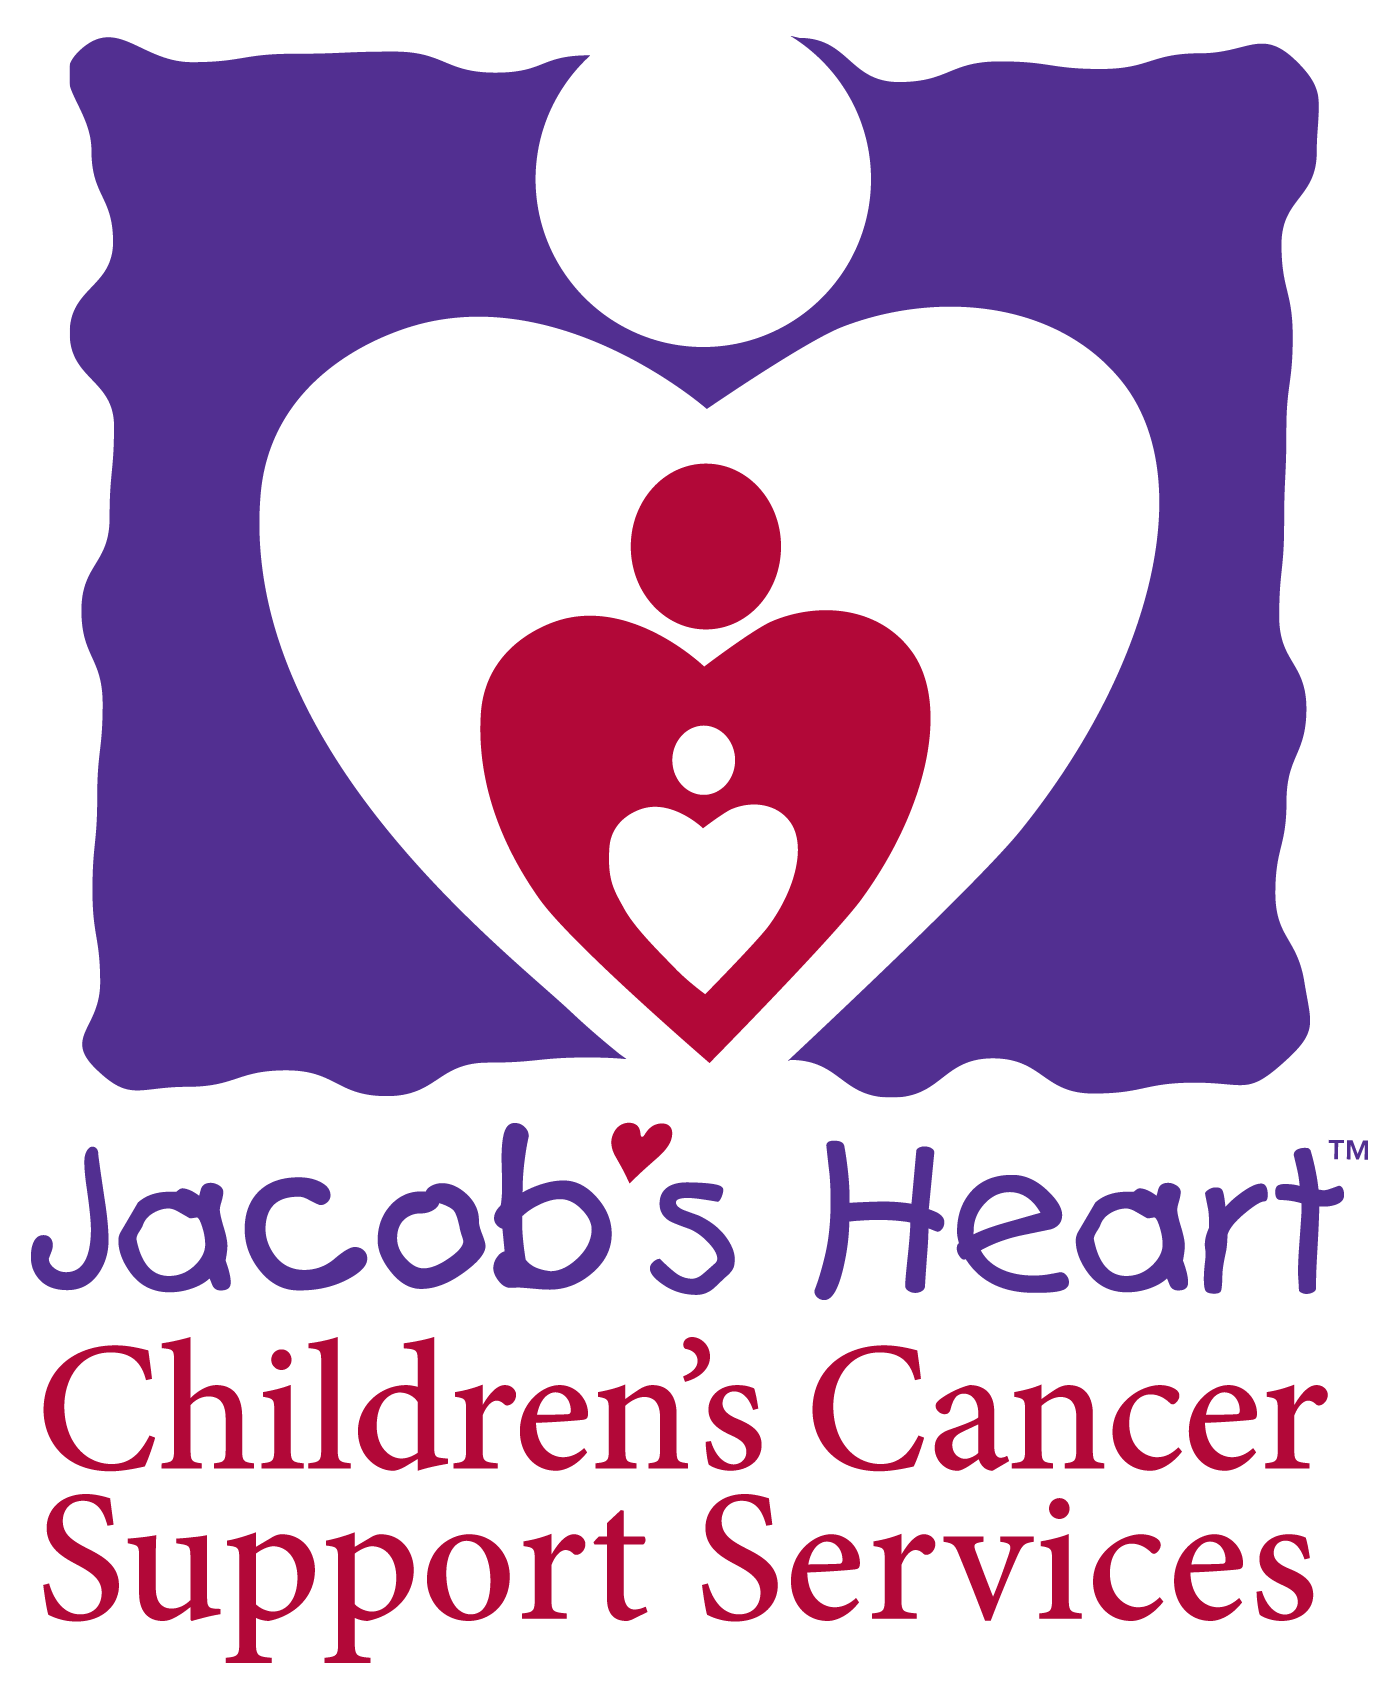 Jacob’s Heart Children’s Cancer Support Services